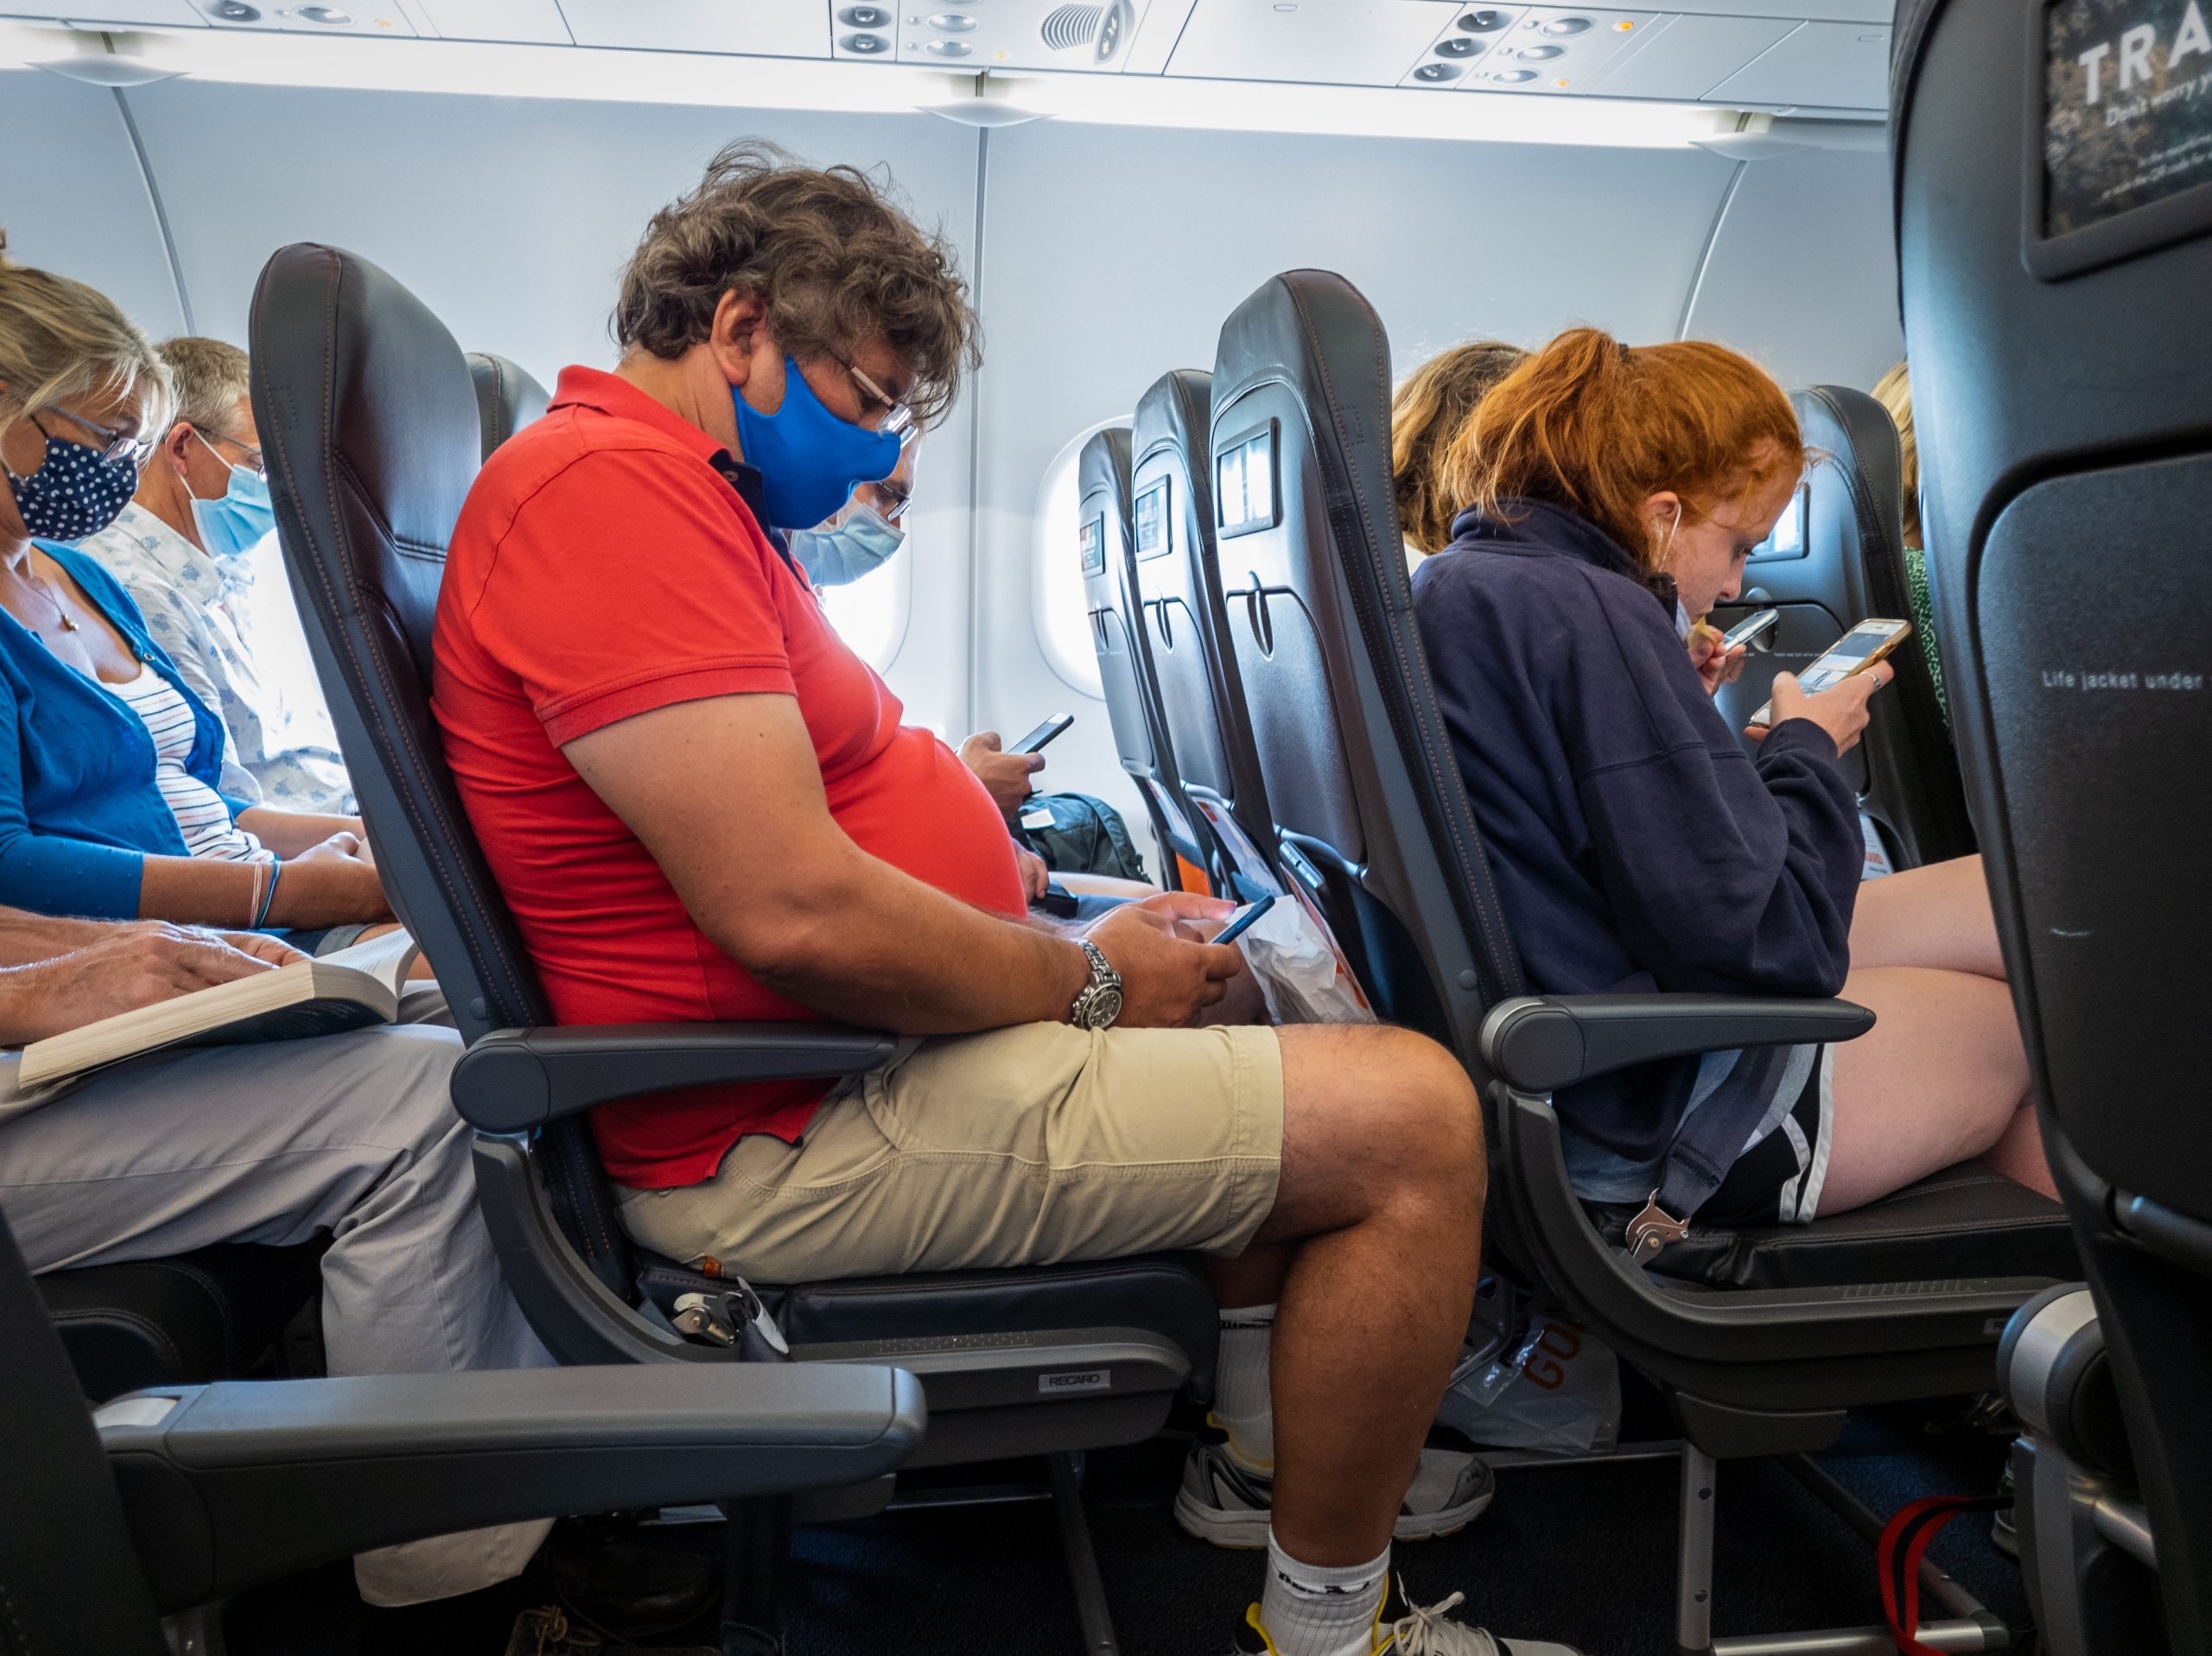 England Could Become First Country to Let Airline Passengers Ditch Face Masks